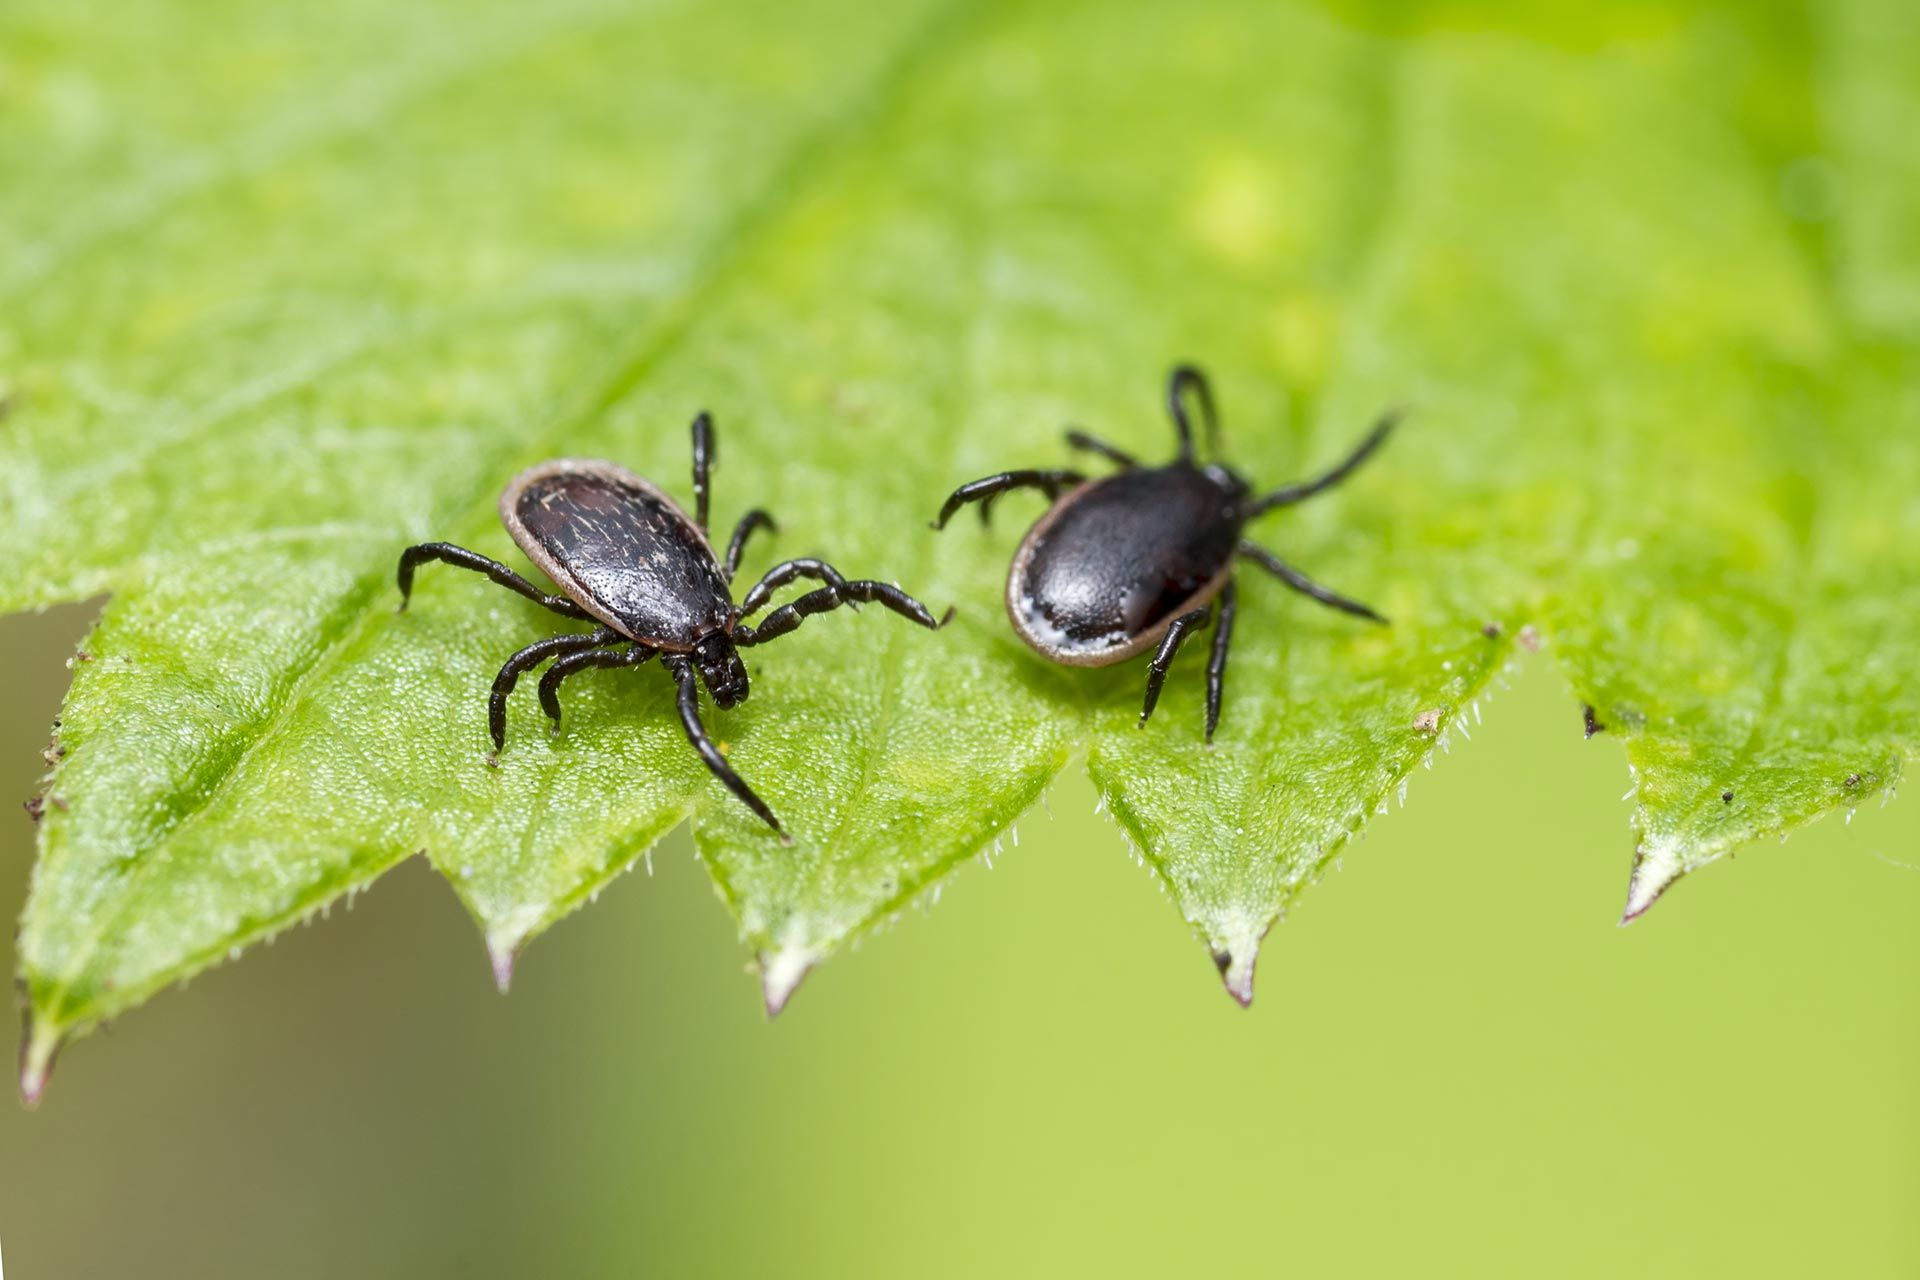 Pilgrim Pest Professionals is a tick exterminator that offers tick control services, tick removal, and tick spraying services.